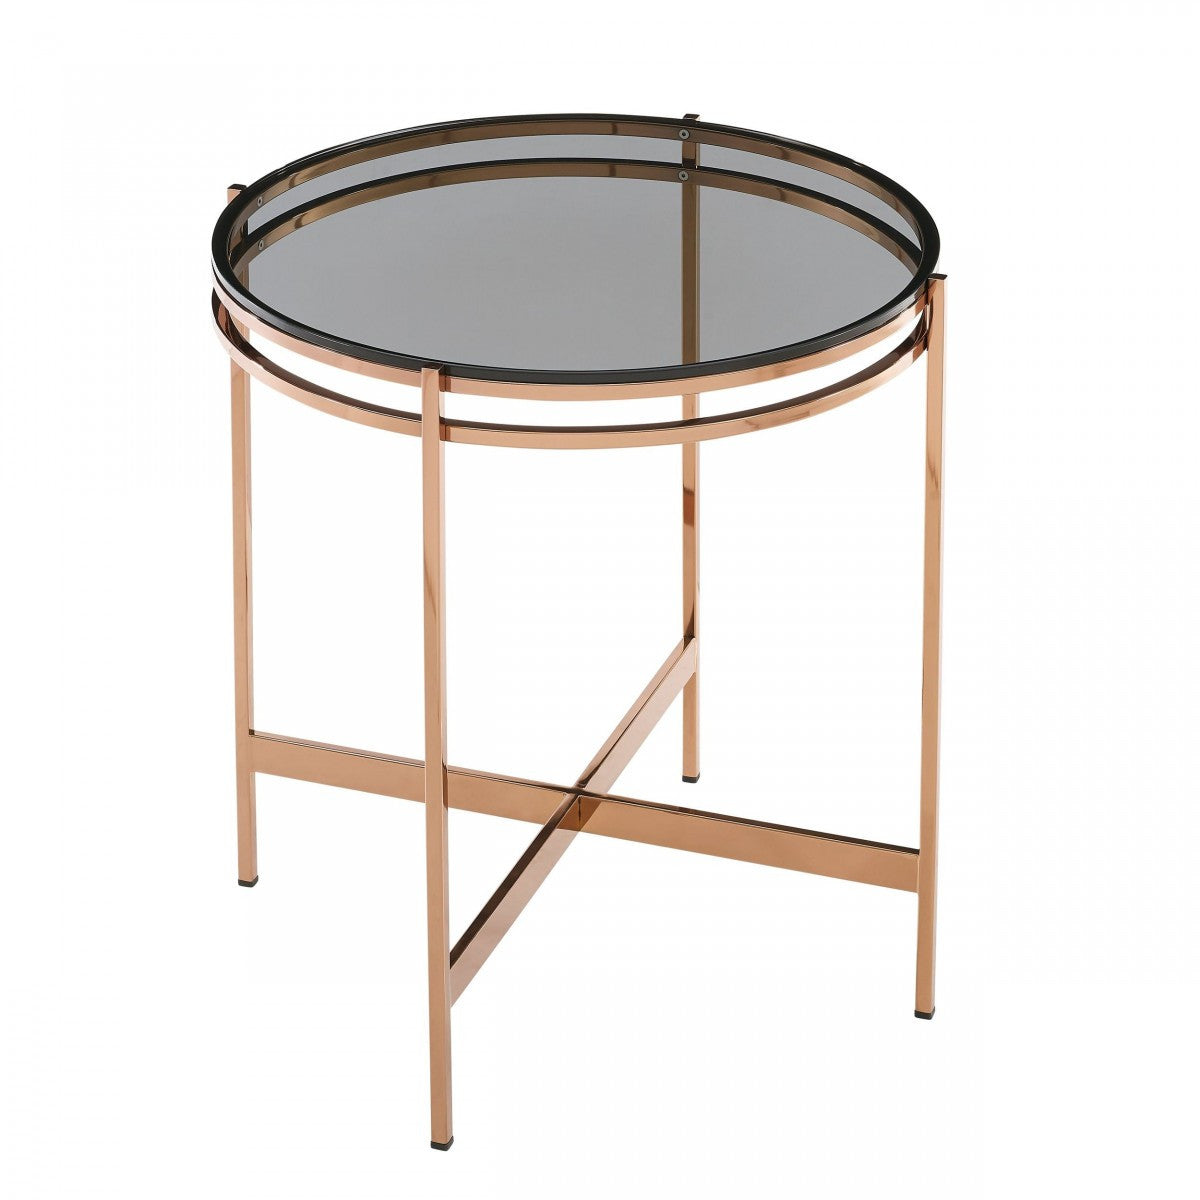 22" Rosegold And Smoke Glass Geo Round End Table